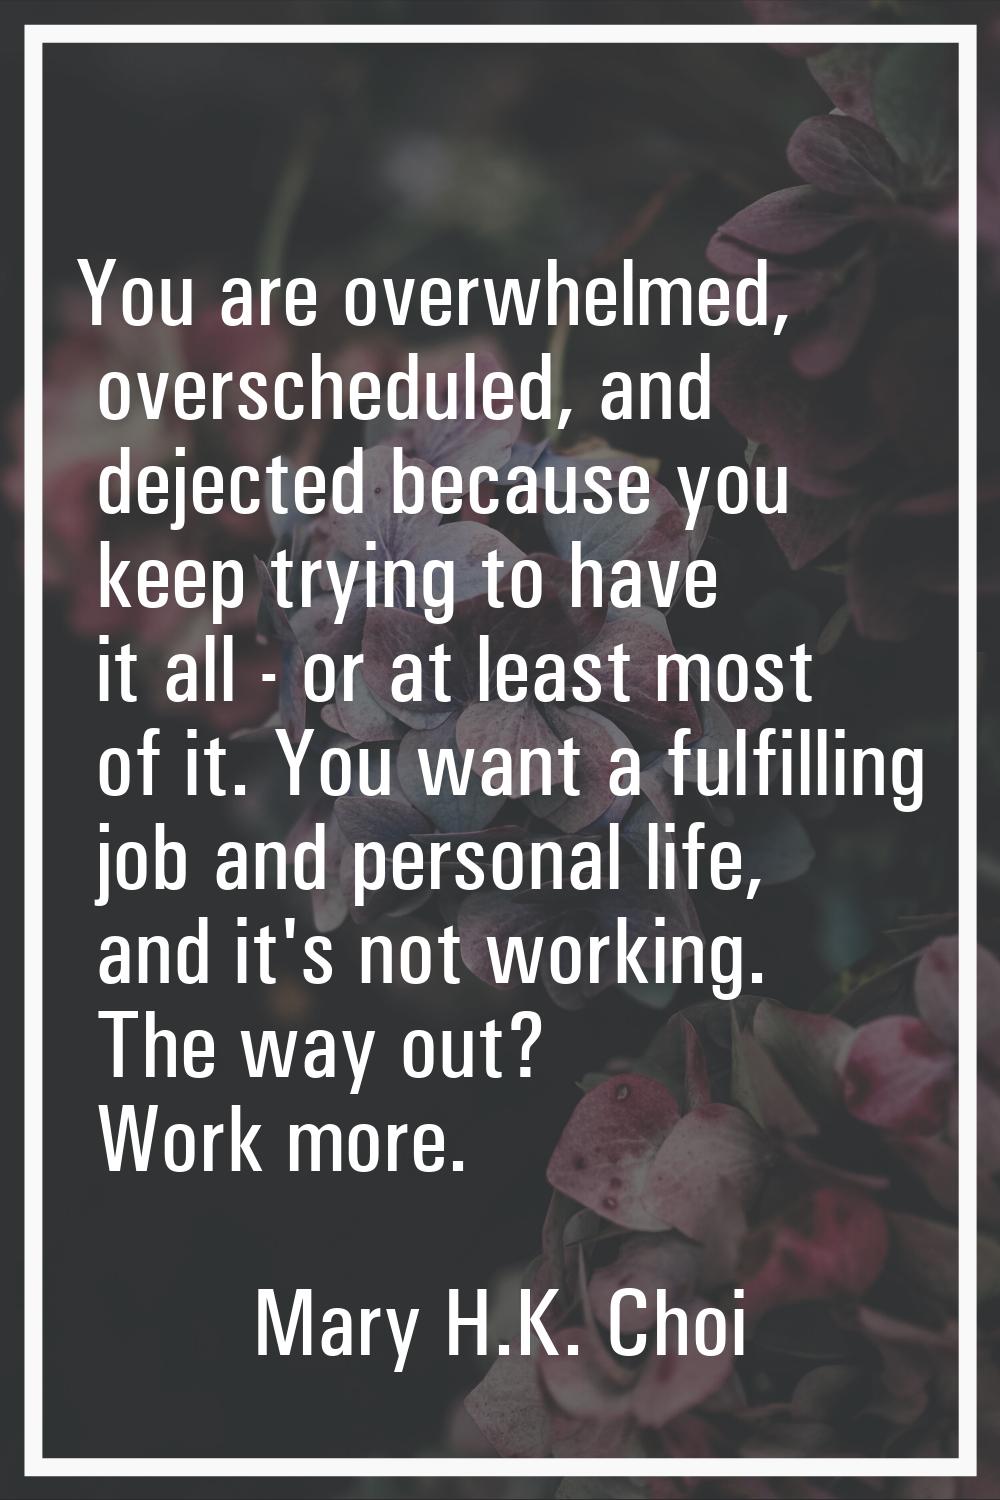 You are overwhelmed, overscheduled, and dejected because you keep trying to have it all - or at lea